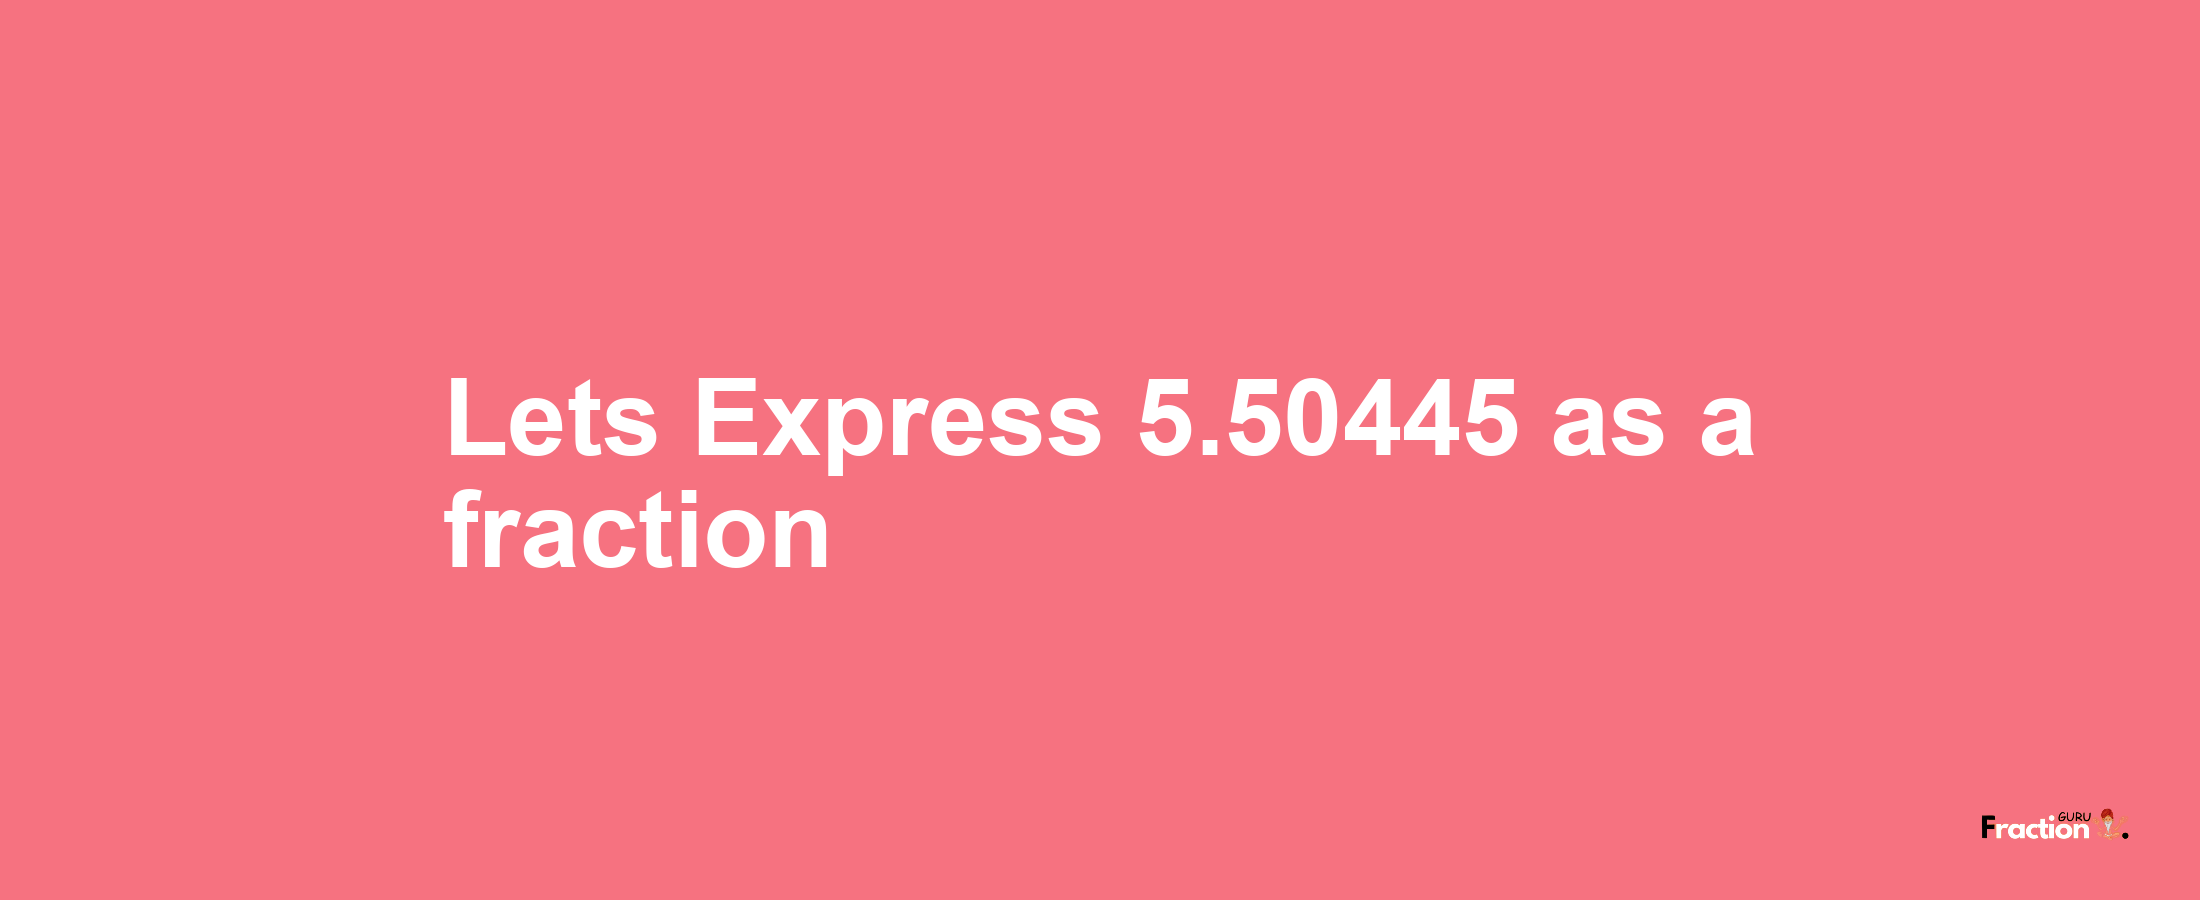 Lets Express 5.50445 as afraction